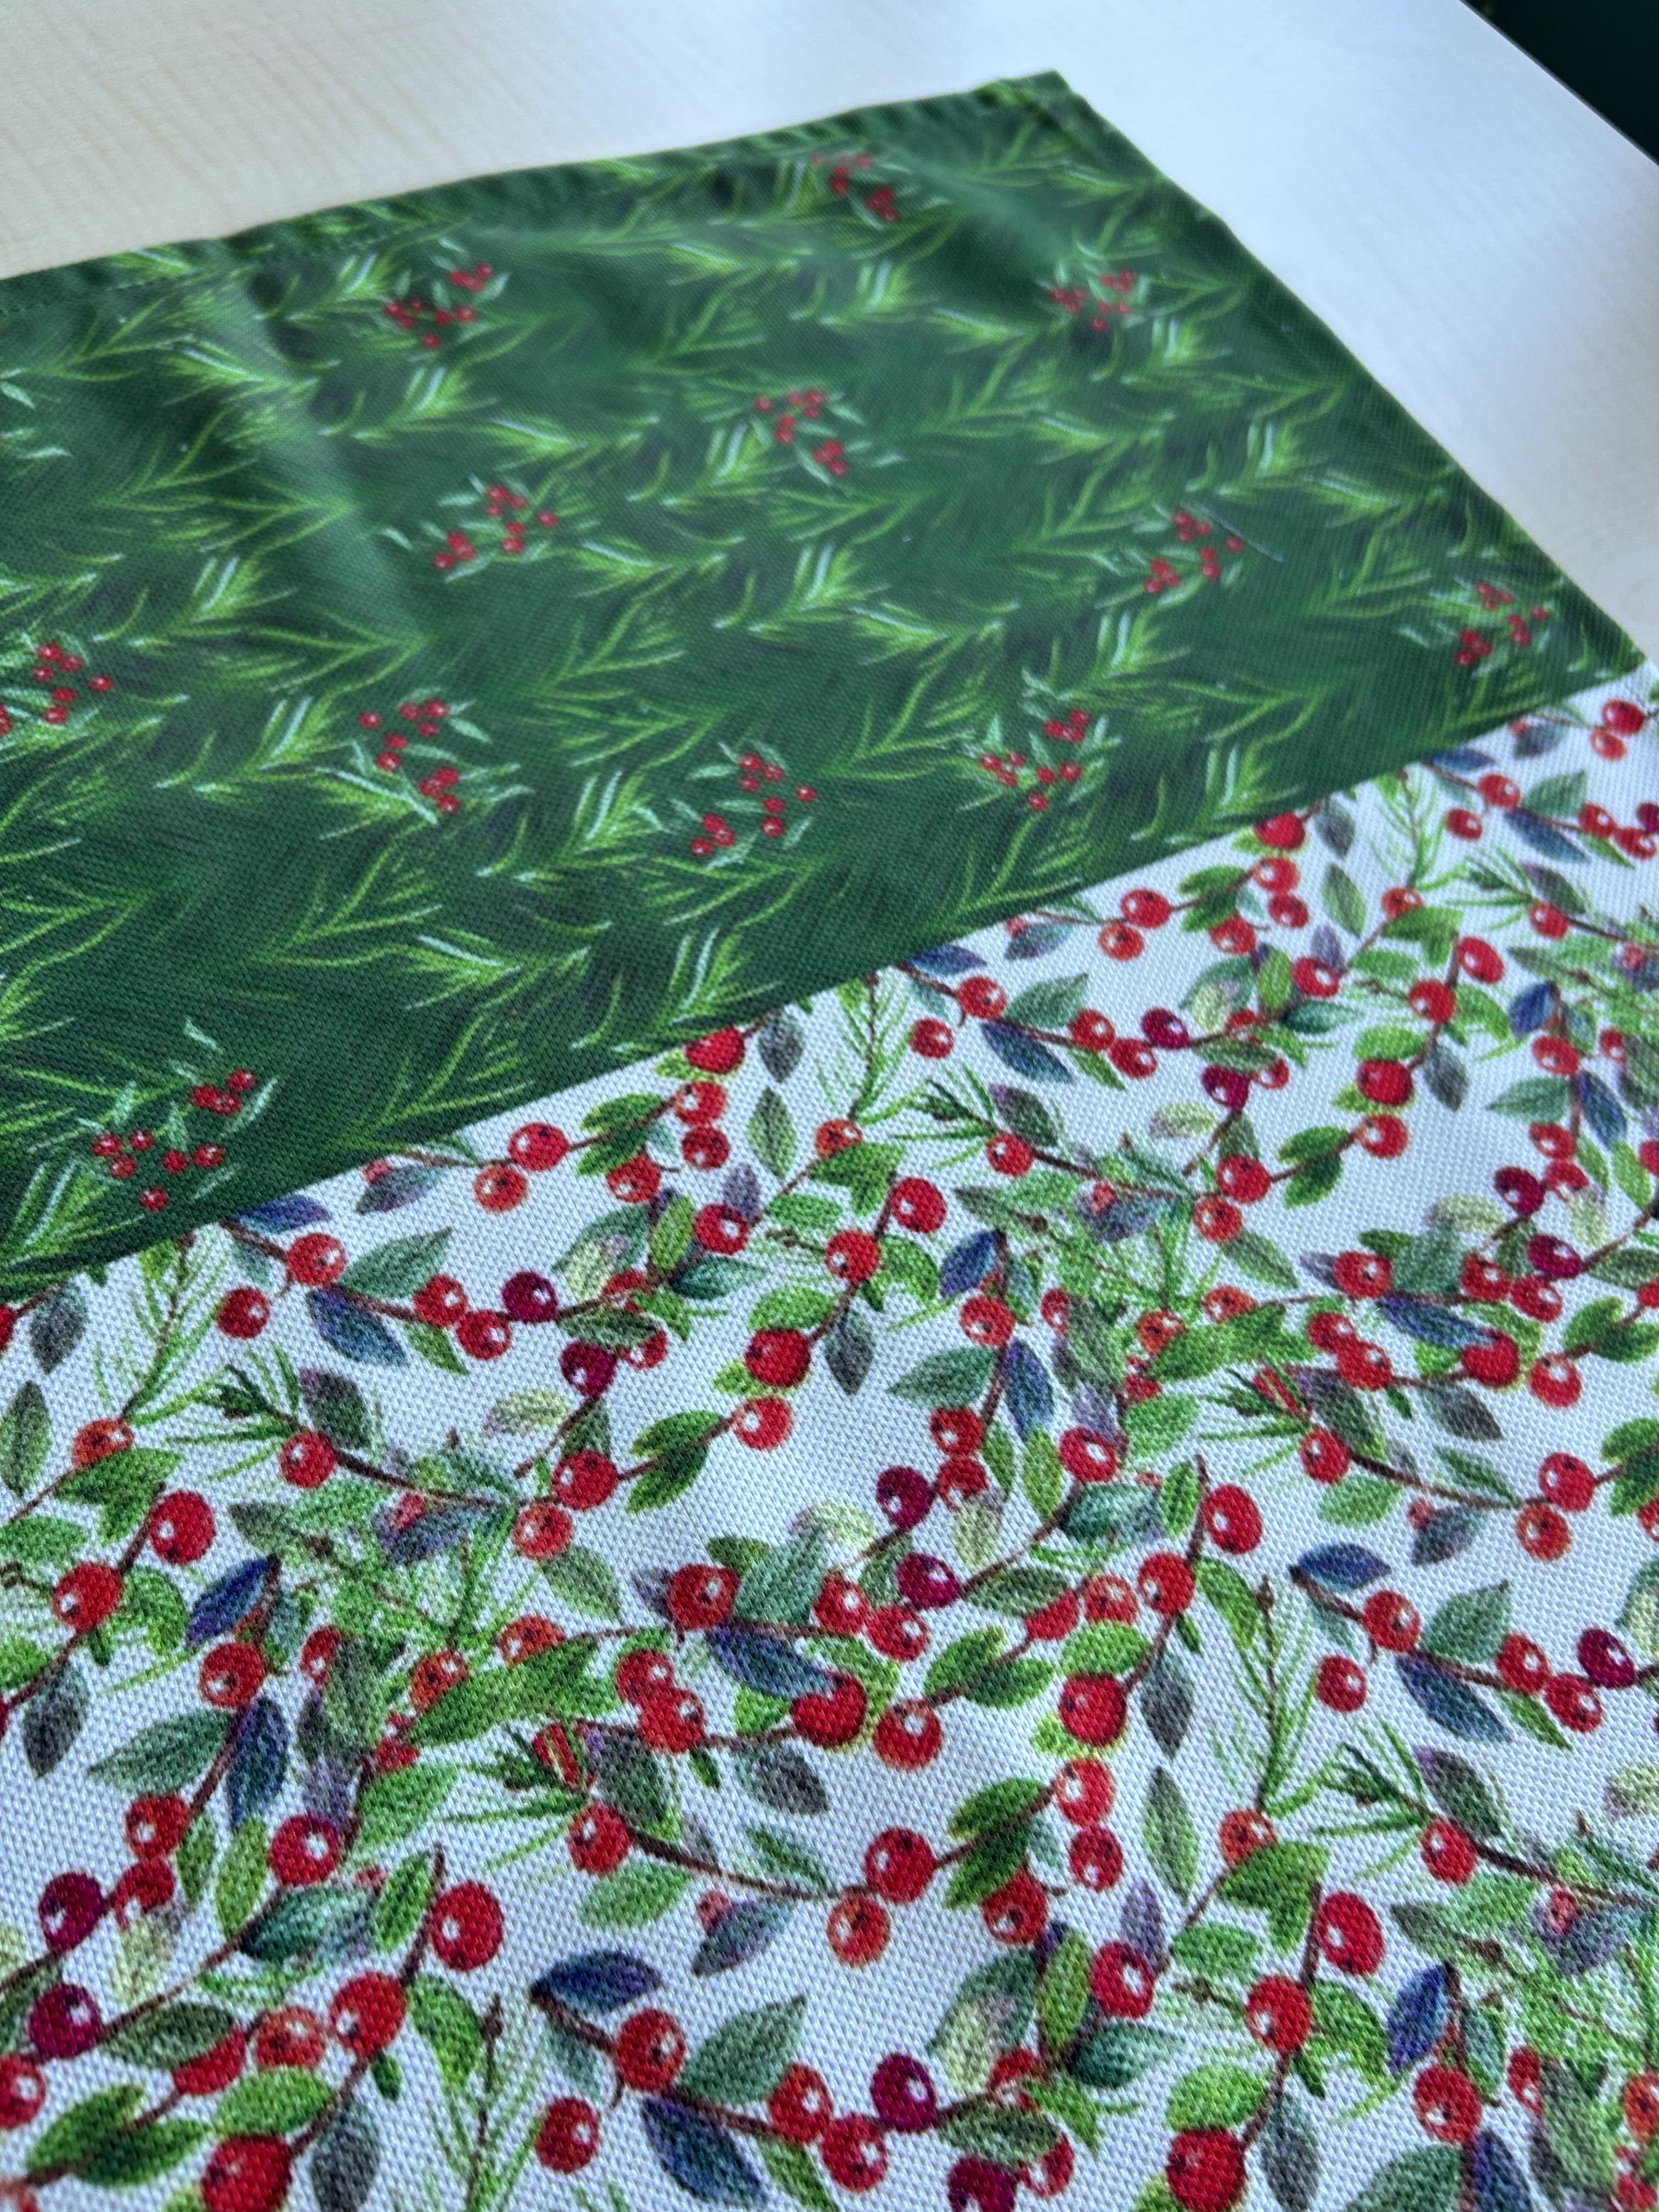 Holly Berry and Greenery Holiday Inspired Runner, Christmas, Rectangular, 17"x59" - Wear Sierra